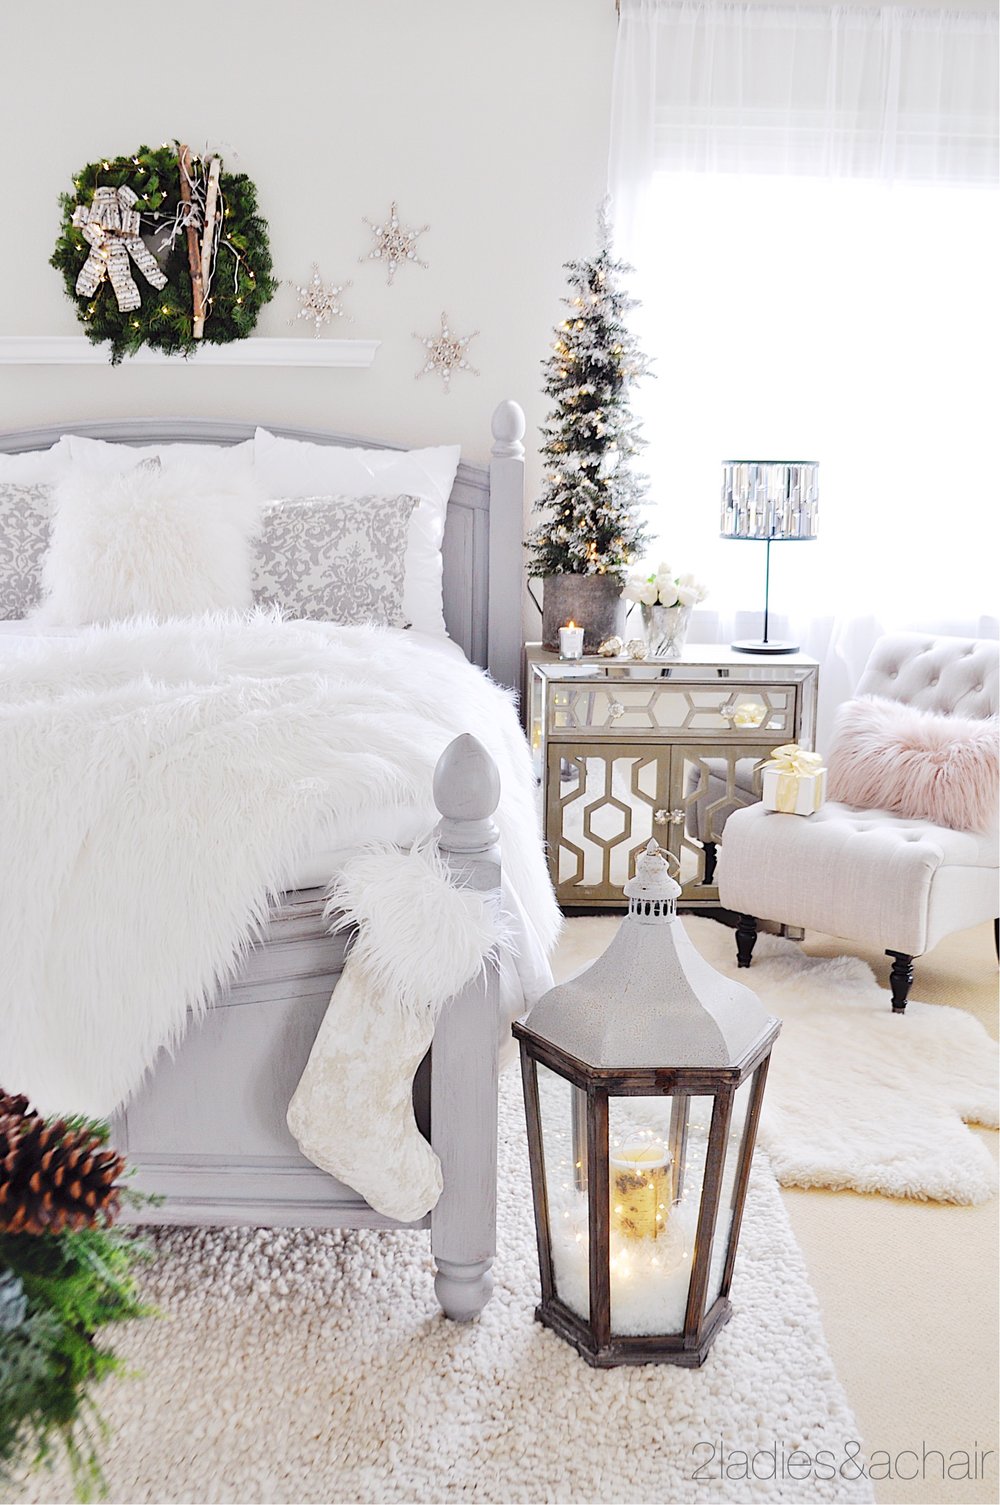 Simple Christmas Decor Ideas For Your Bedroom — 2 Ladies & A Chair